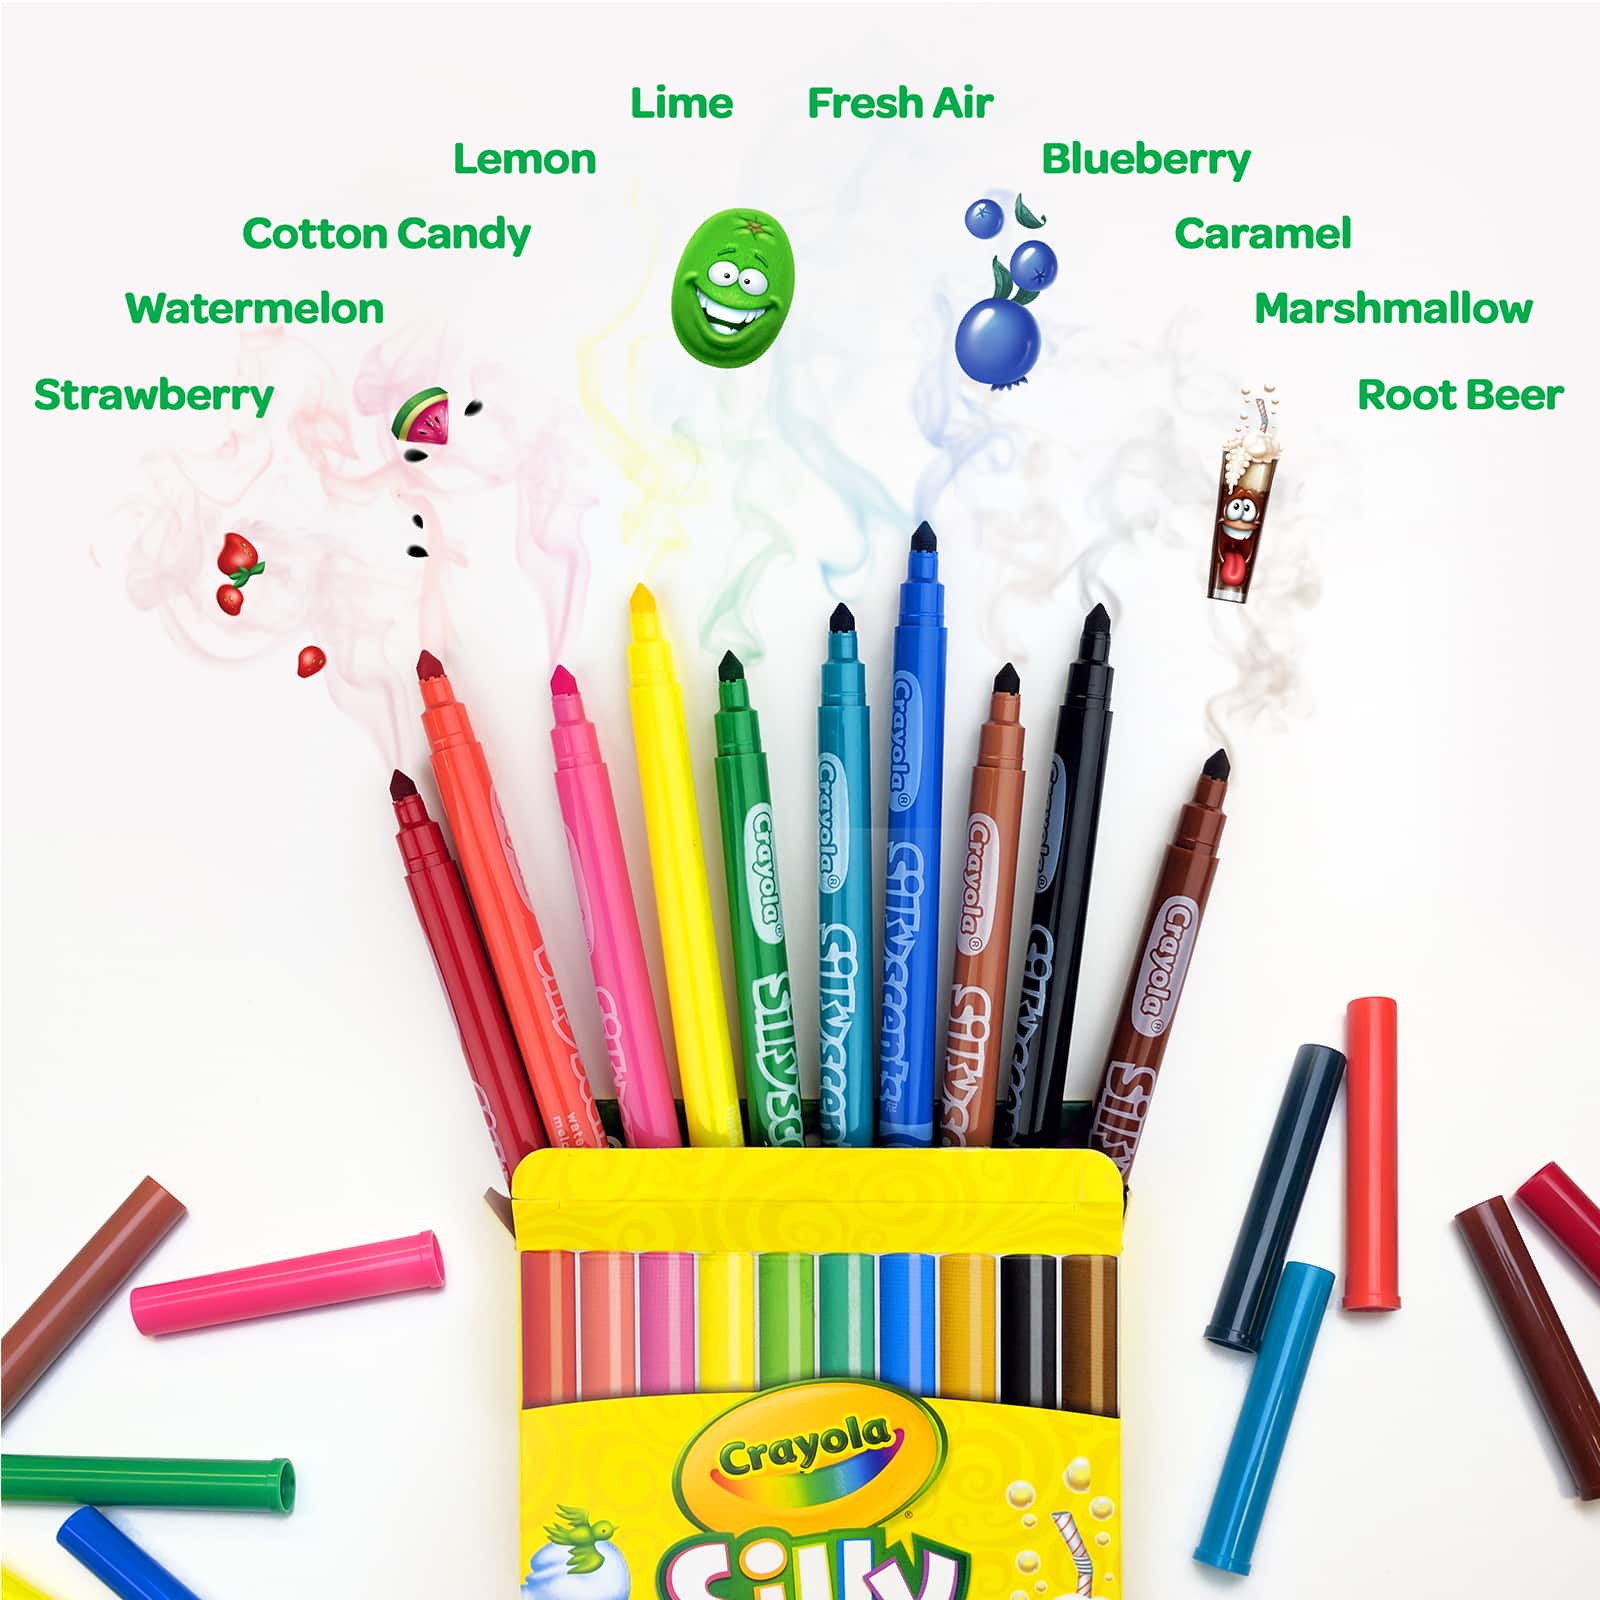 Crayola 588199 Silly Scents Slim Scented Washable Markers